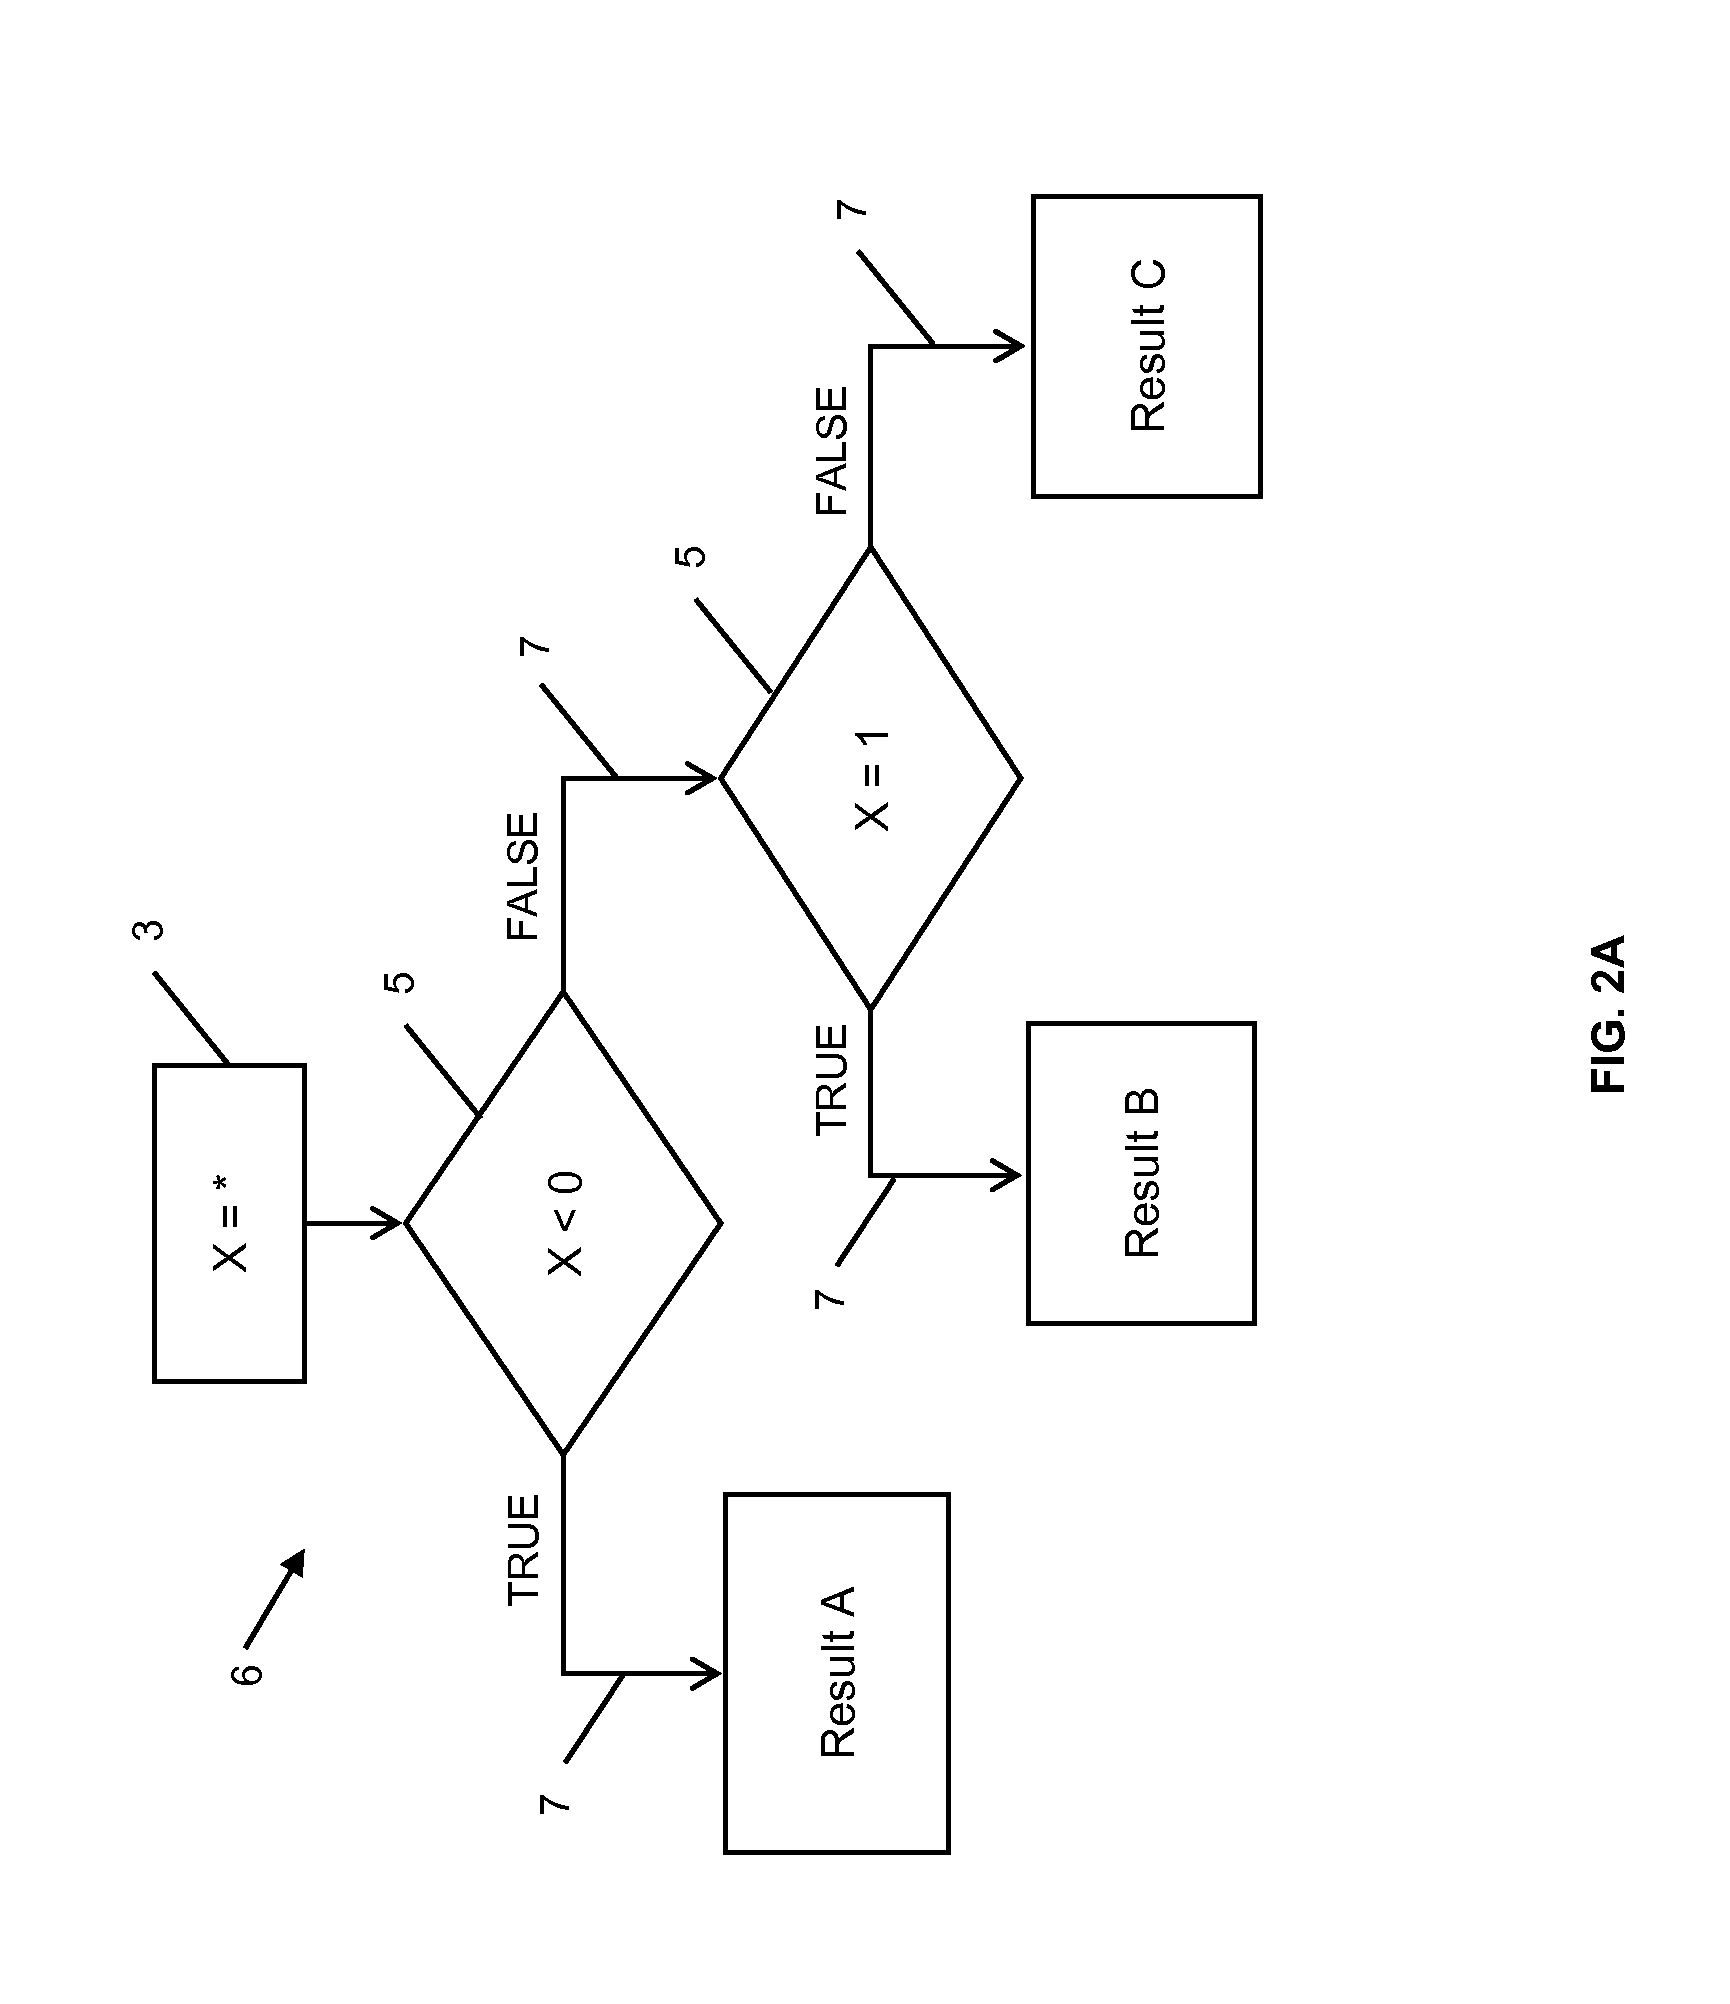 System and methods for generating and managing a virtual device